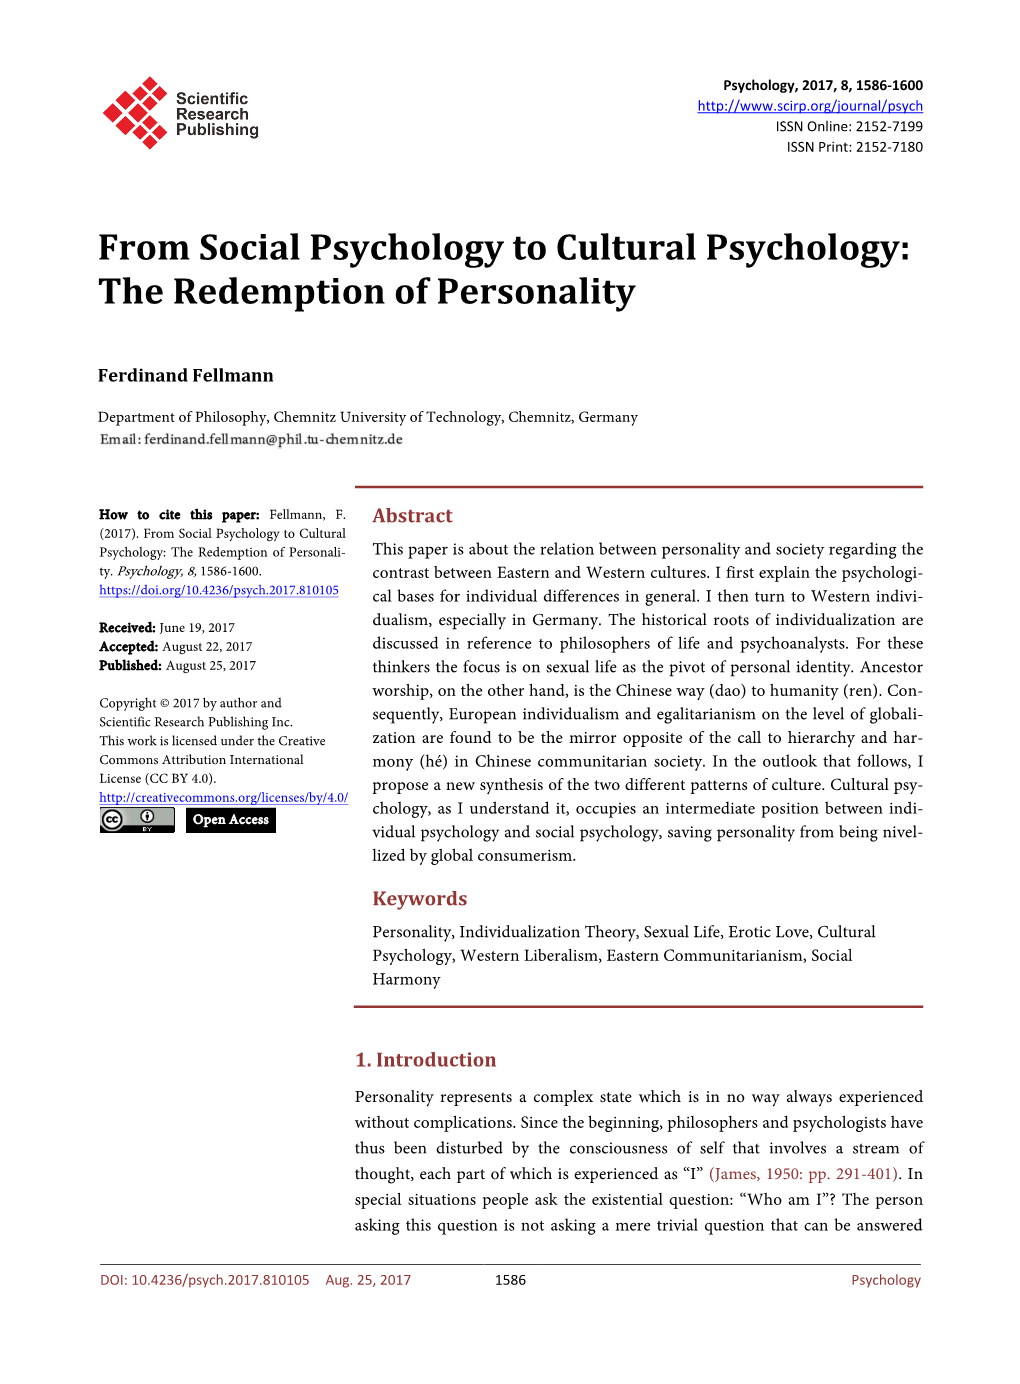 From Social Psychology to Cultural Psychology: the Redemption of Personality